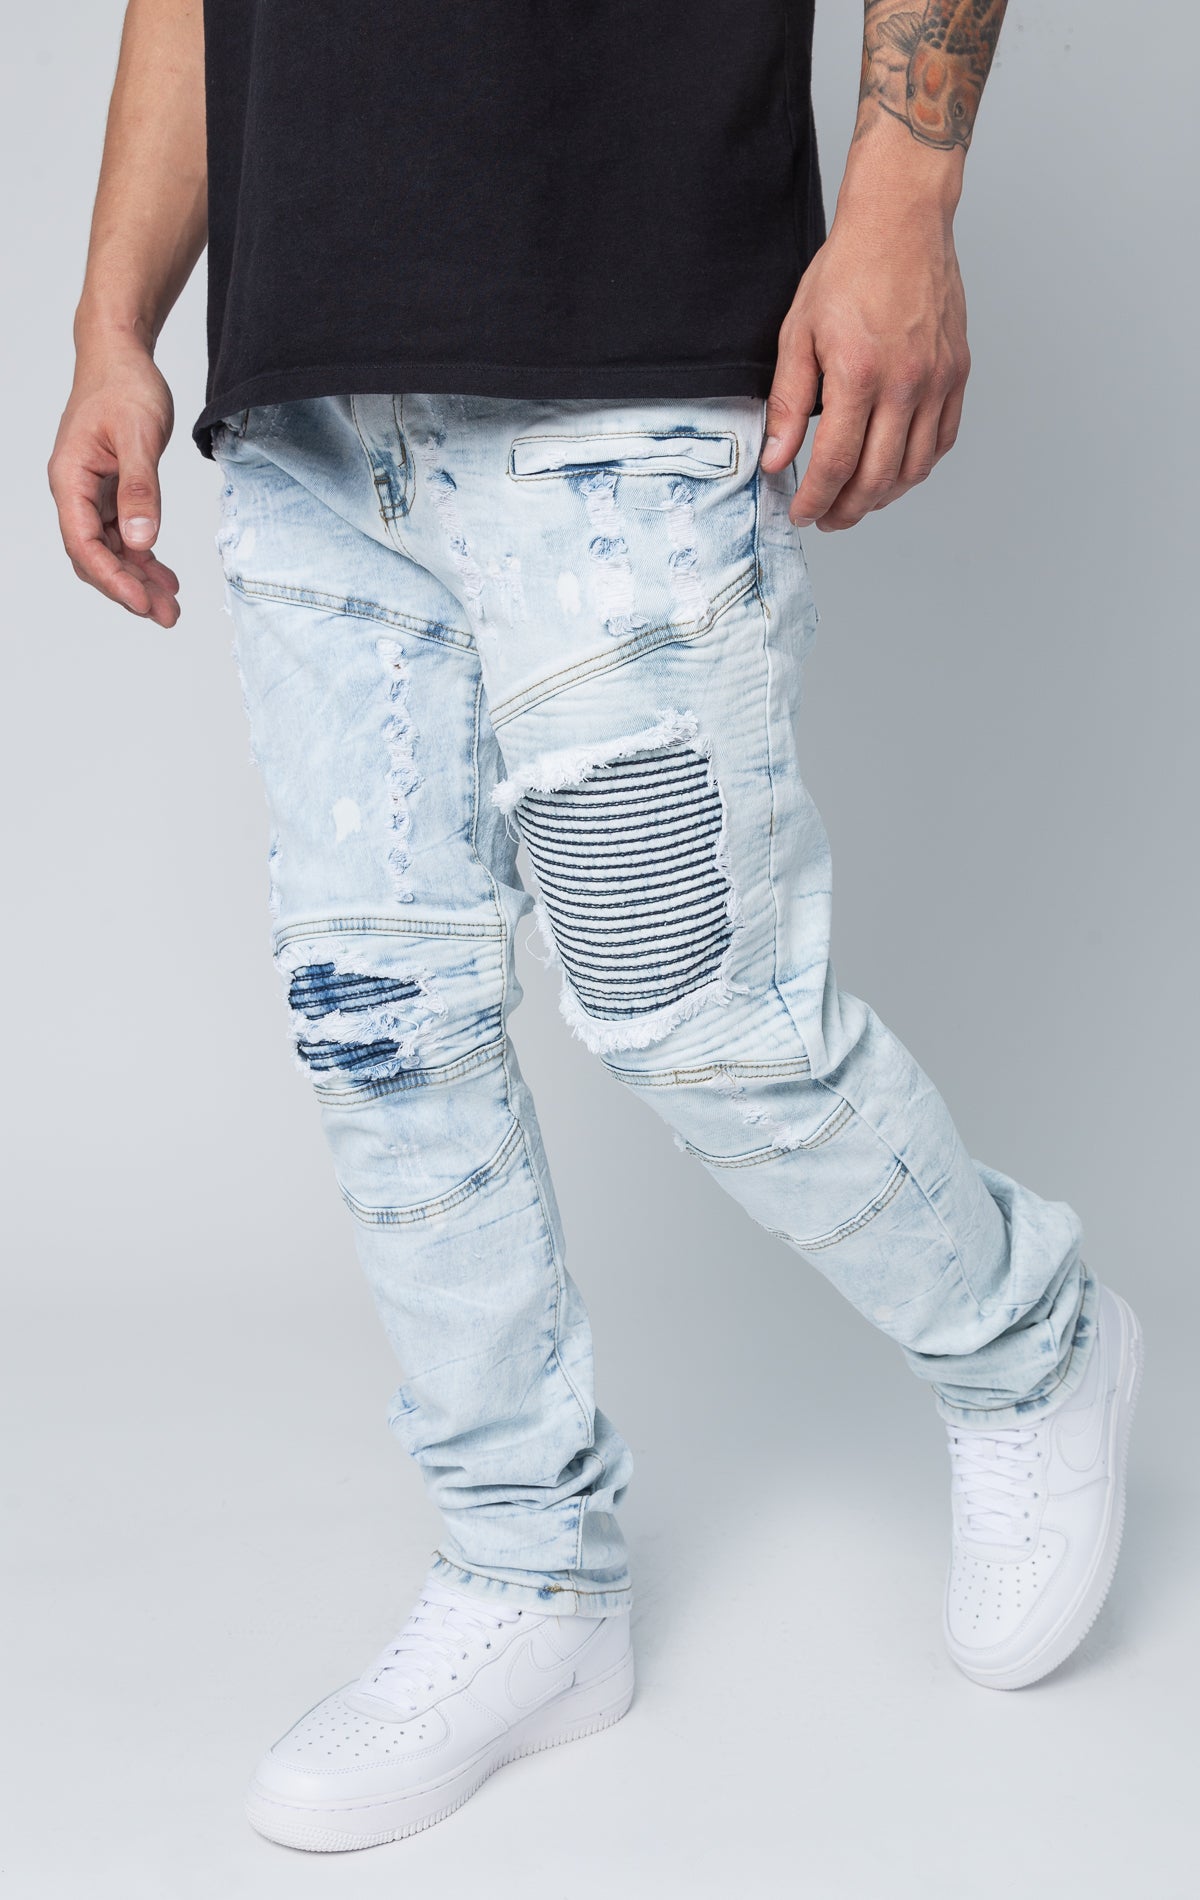 Denim ripped pants in ice blue